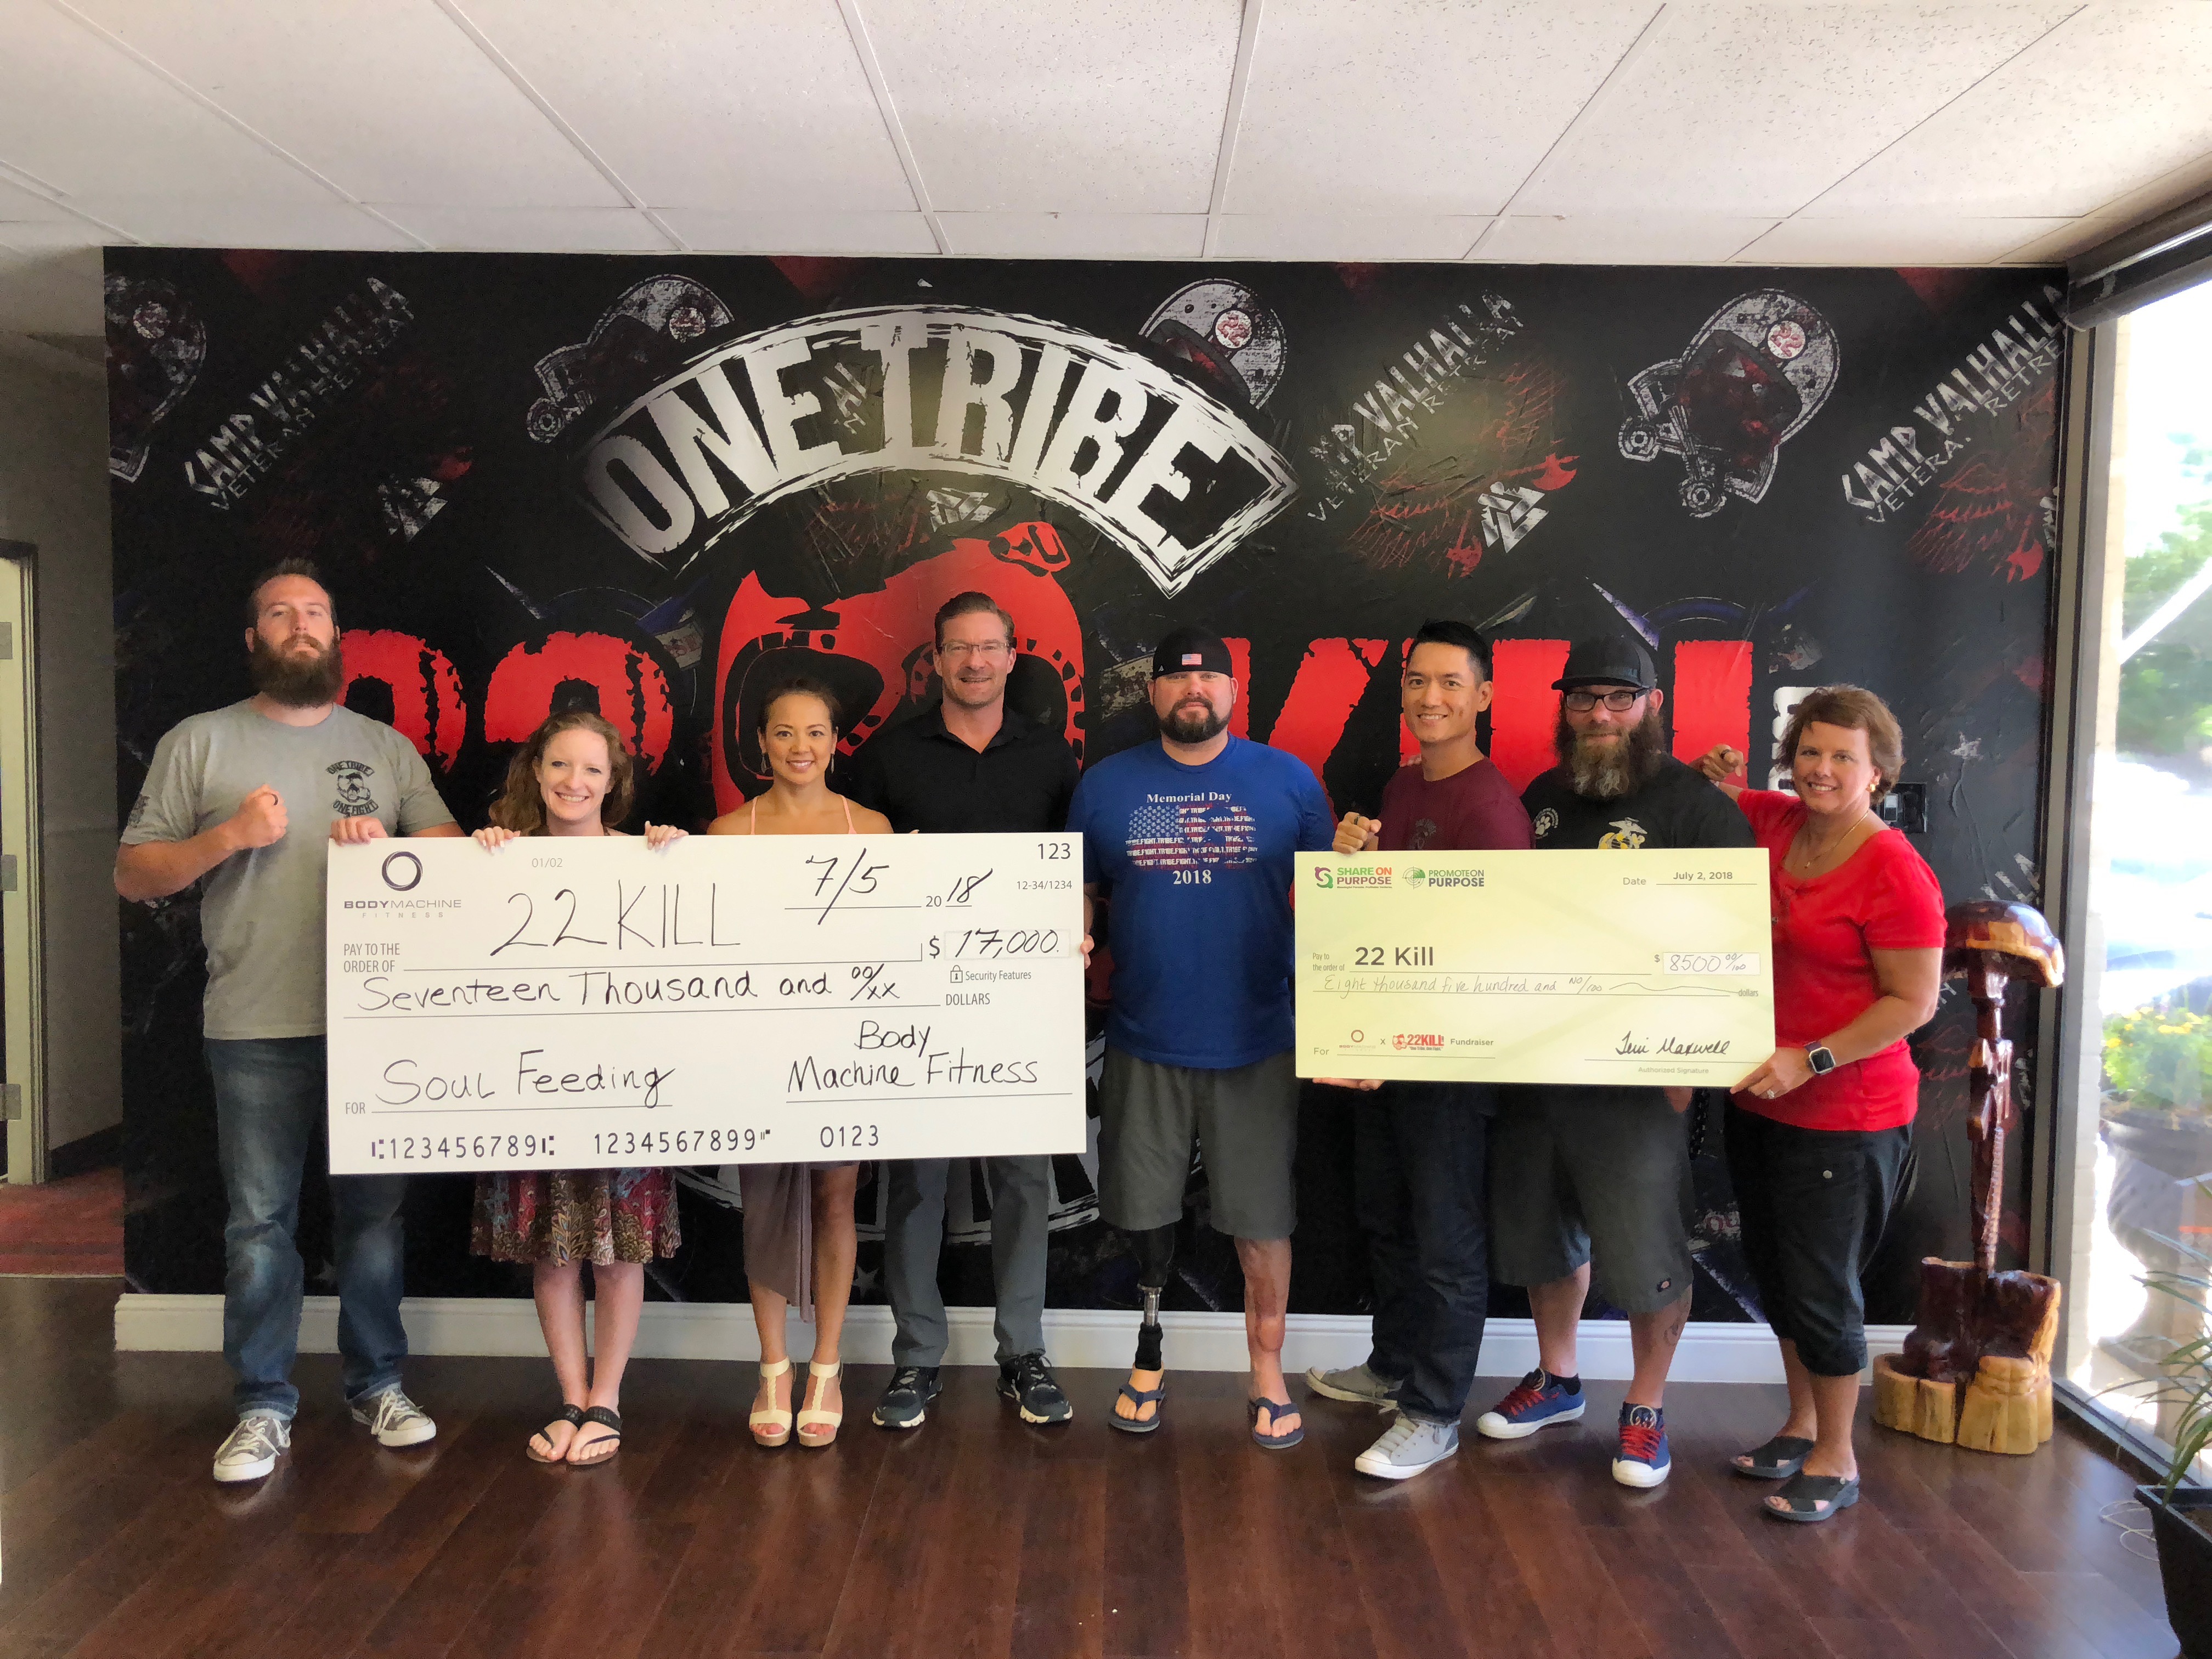 The fitness event raised $25,500 for the North Texas non-profit.